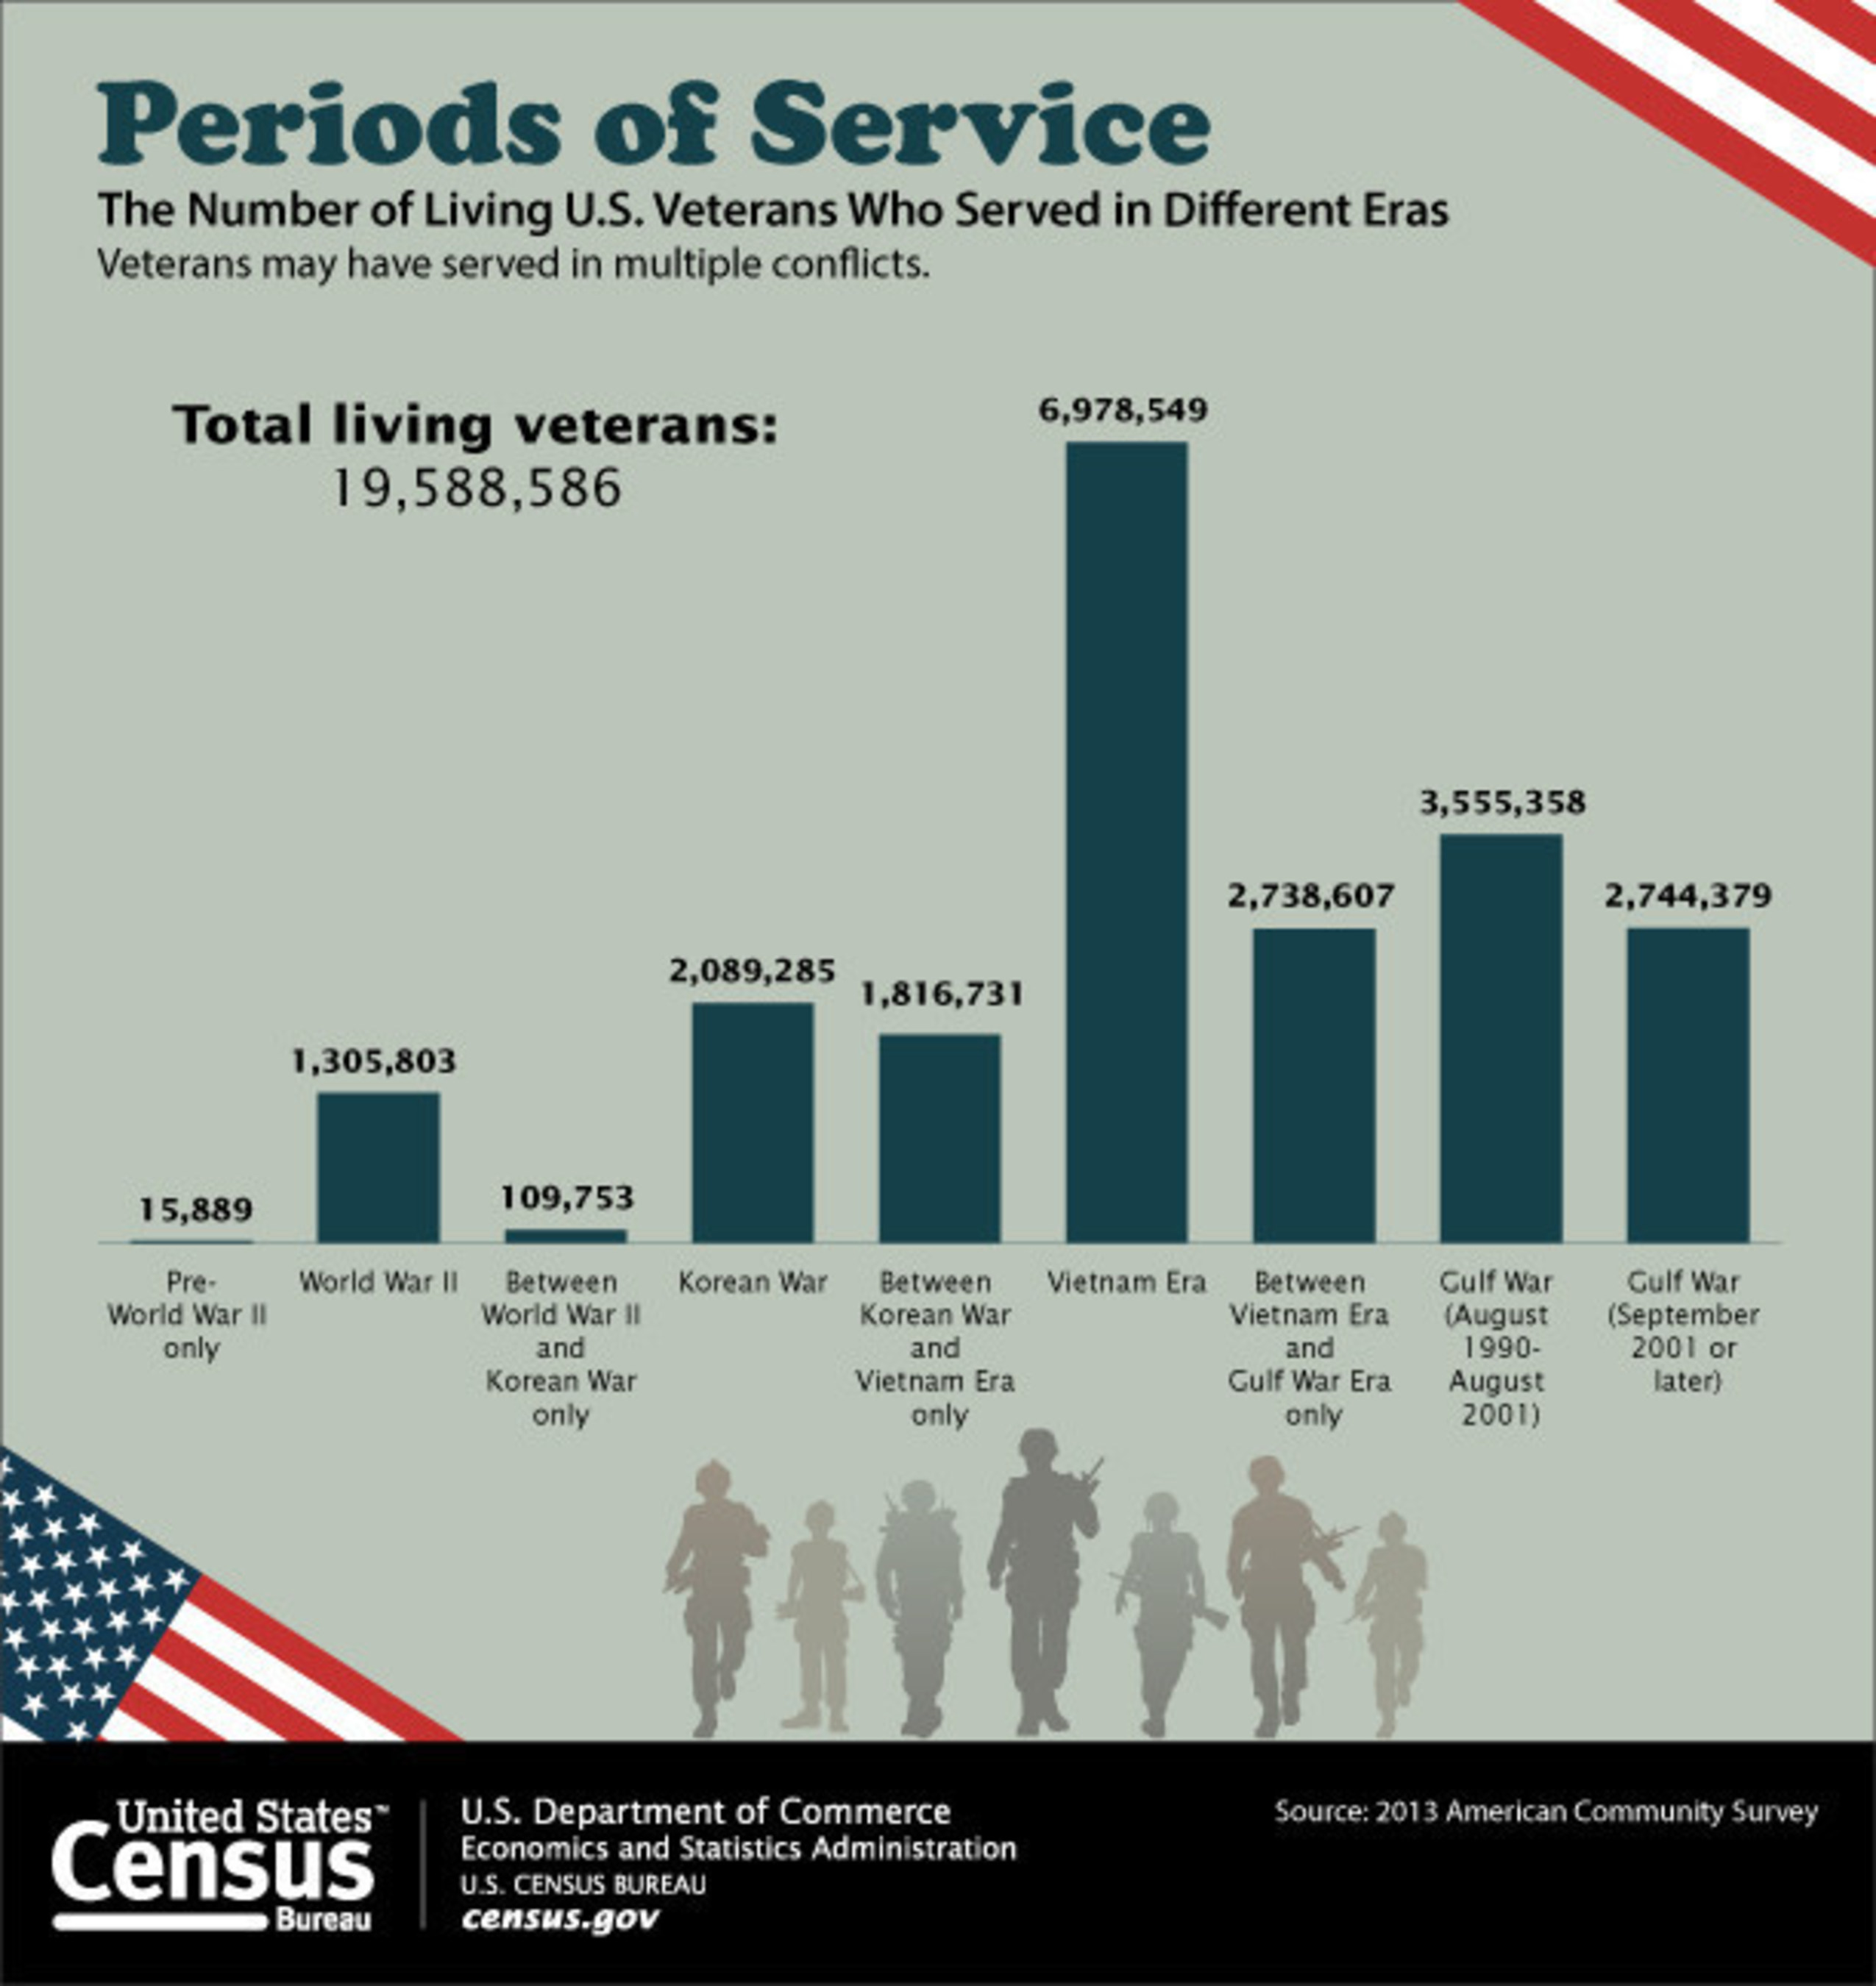 The Census Bureau honors those who served in the armed forces by highlighting a wide range of statistical information on U.S. veterans.